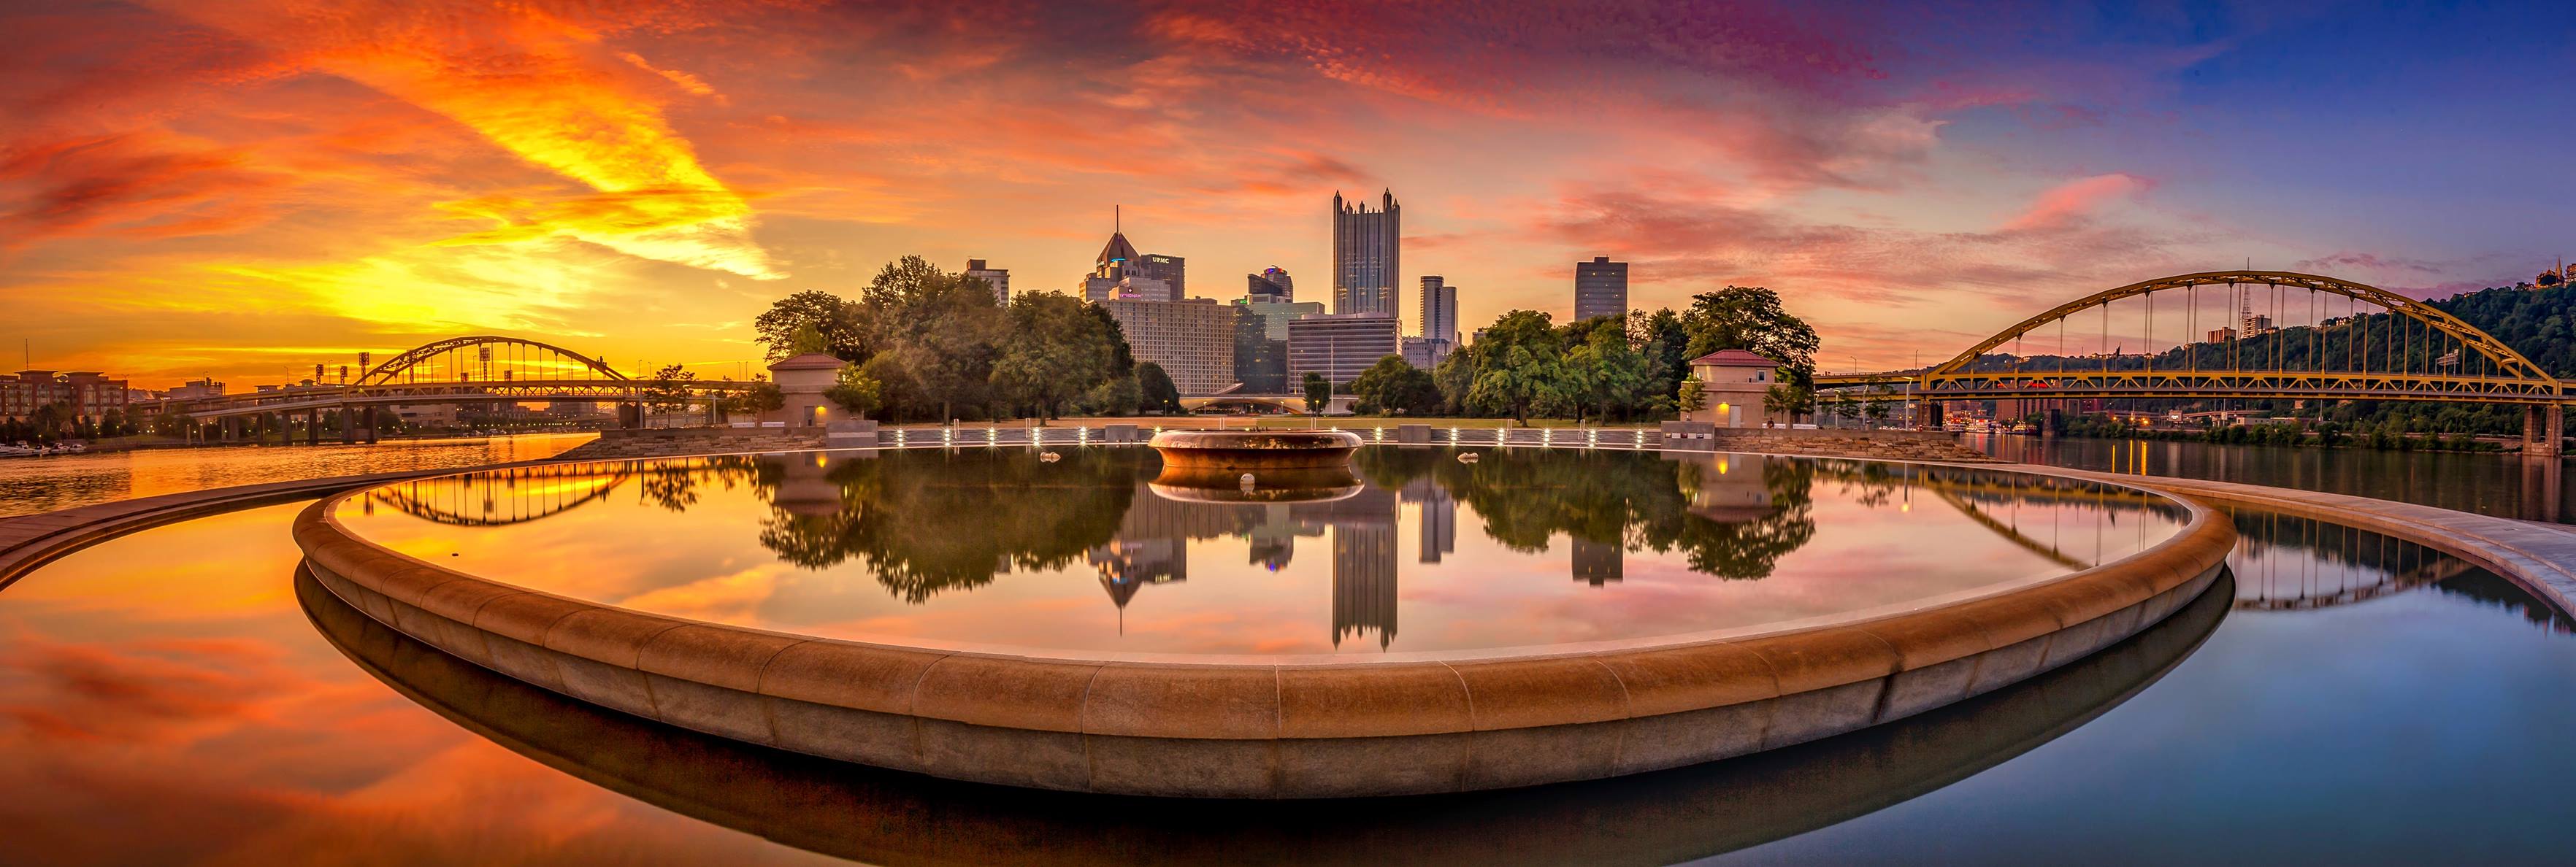 10 MustSee Places to Visit in Pittsburgh This Spring Pittsburgh